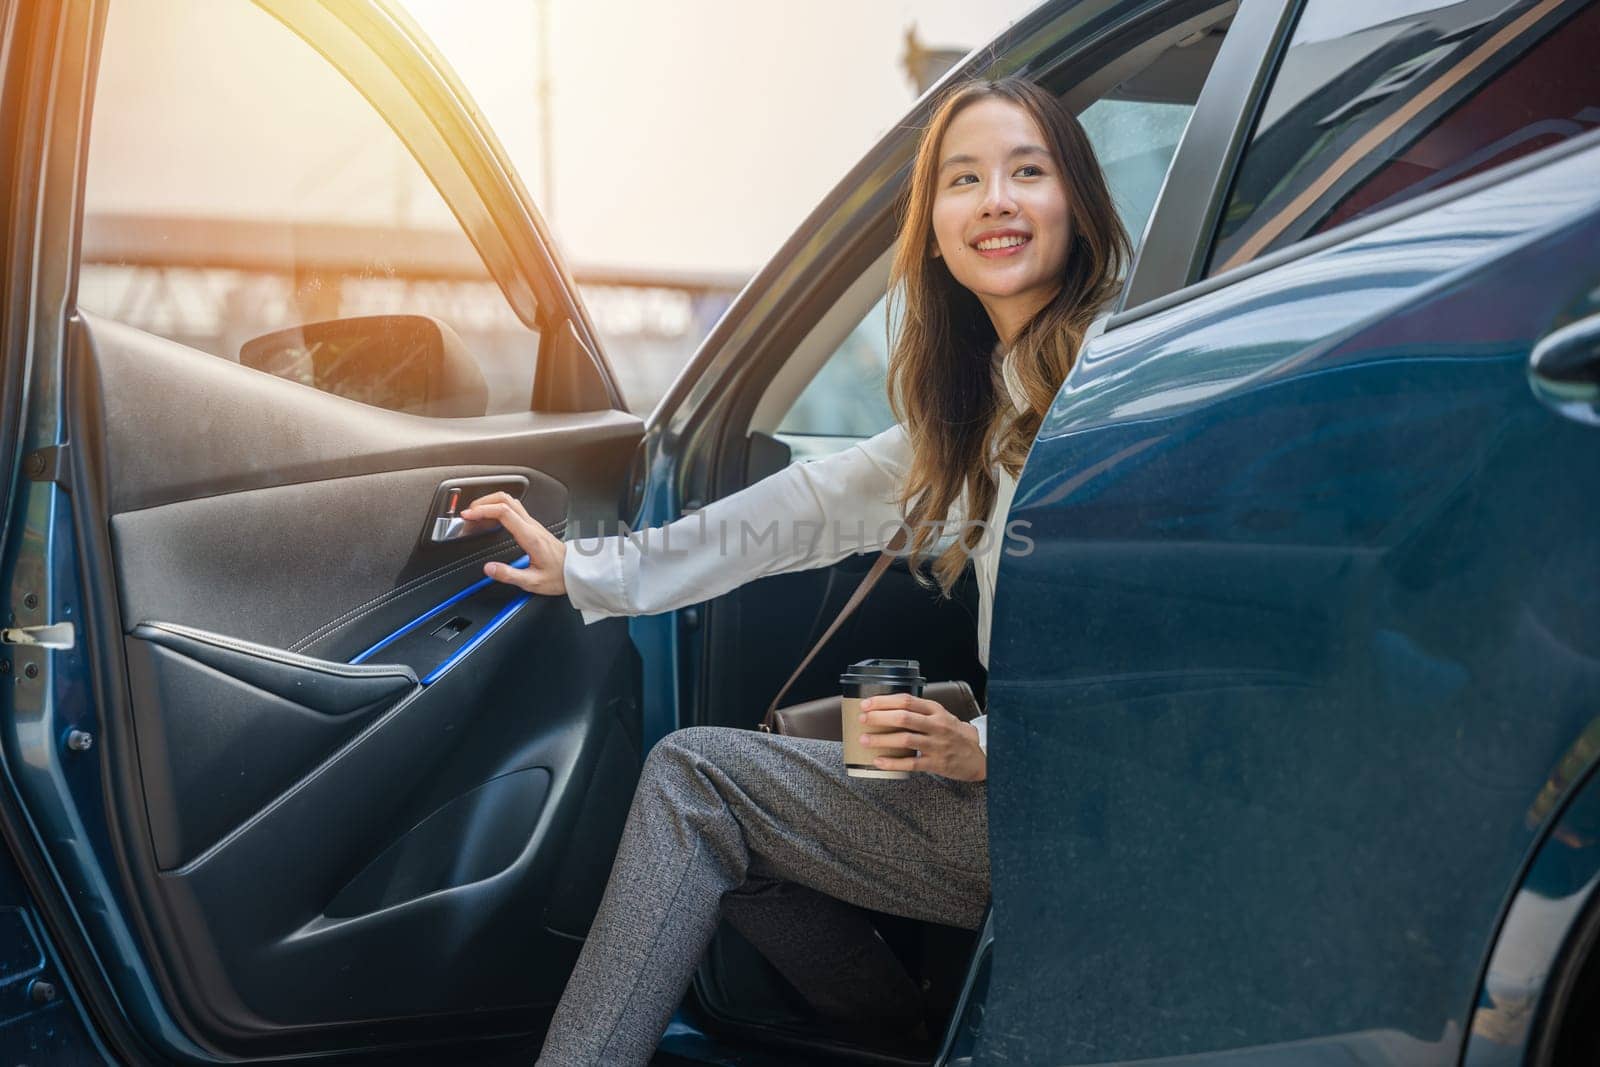 A corporate employee elegant in a business suit sits in a luxurious car. Her long slender leg graced with high heels opens the door symbolizing the transition from luxury driving to business pursuits.